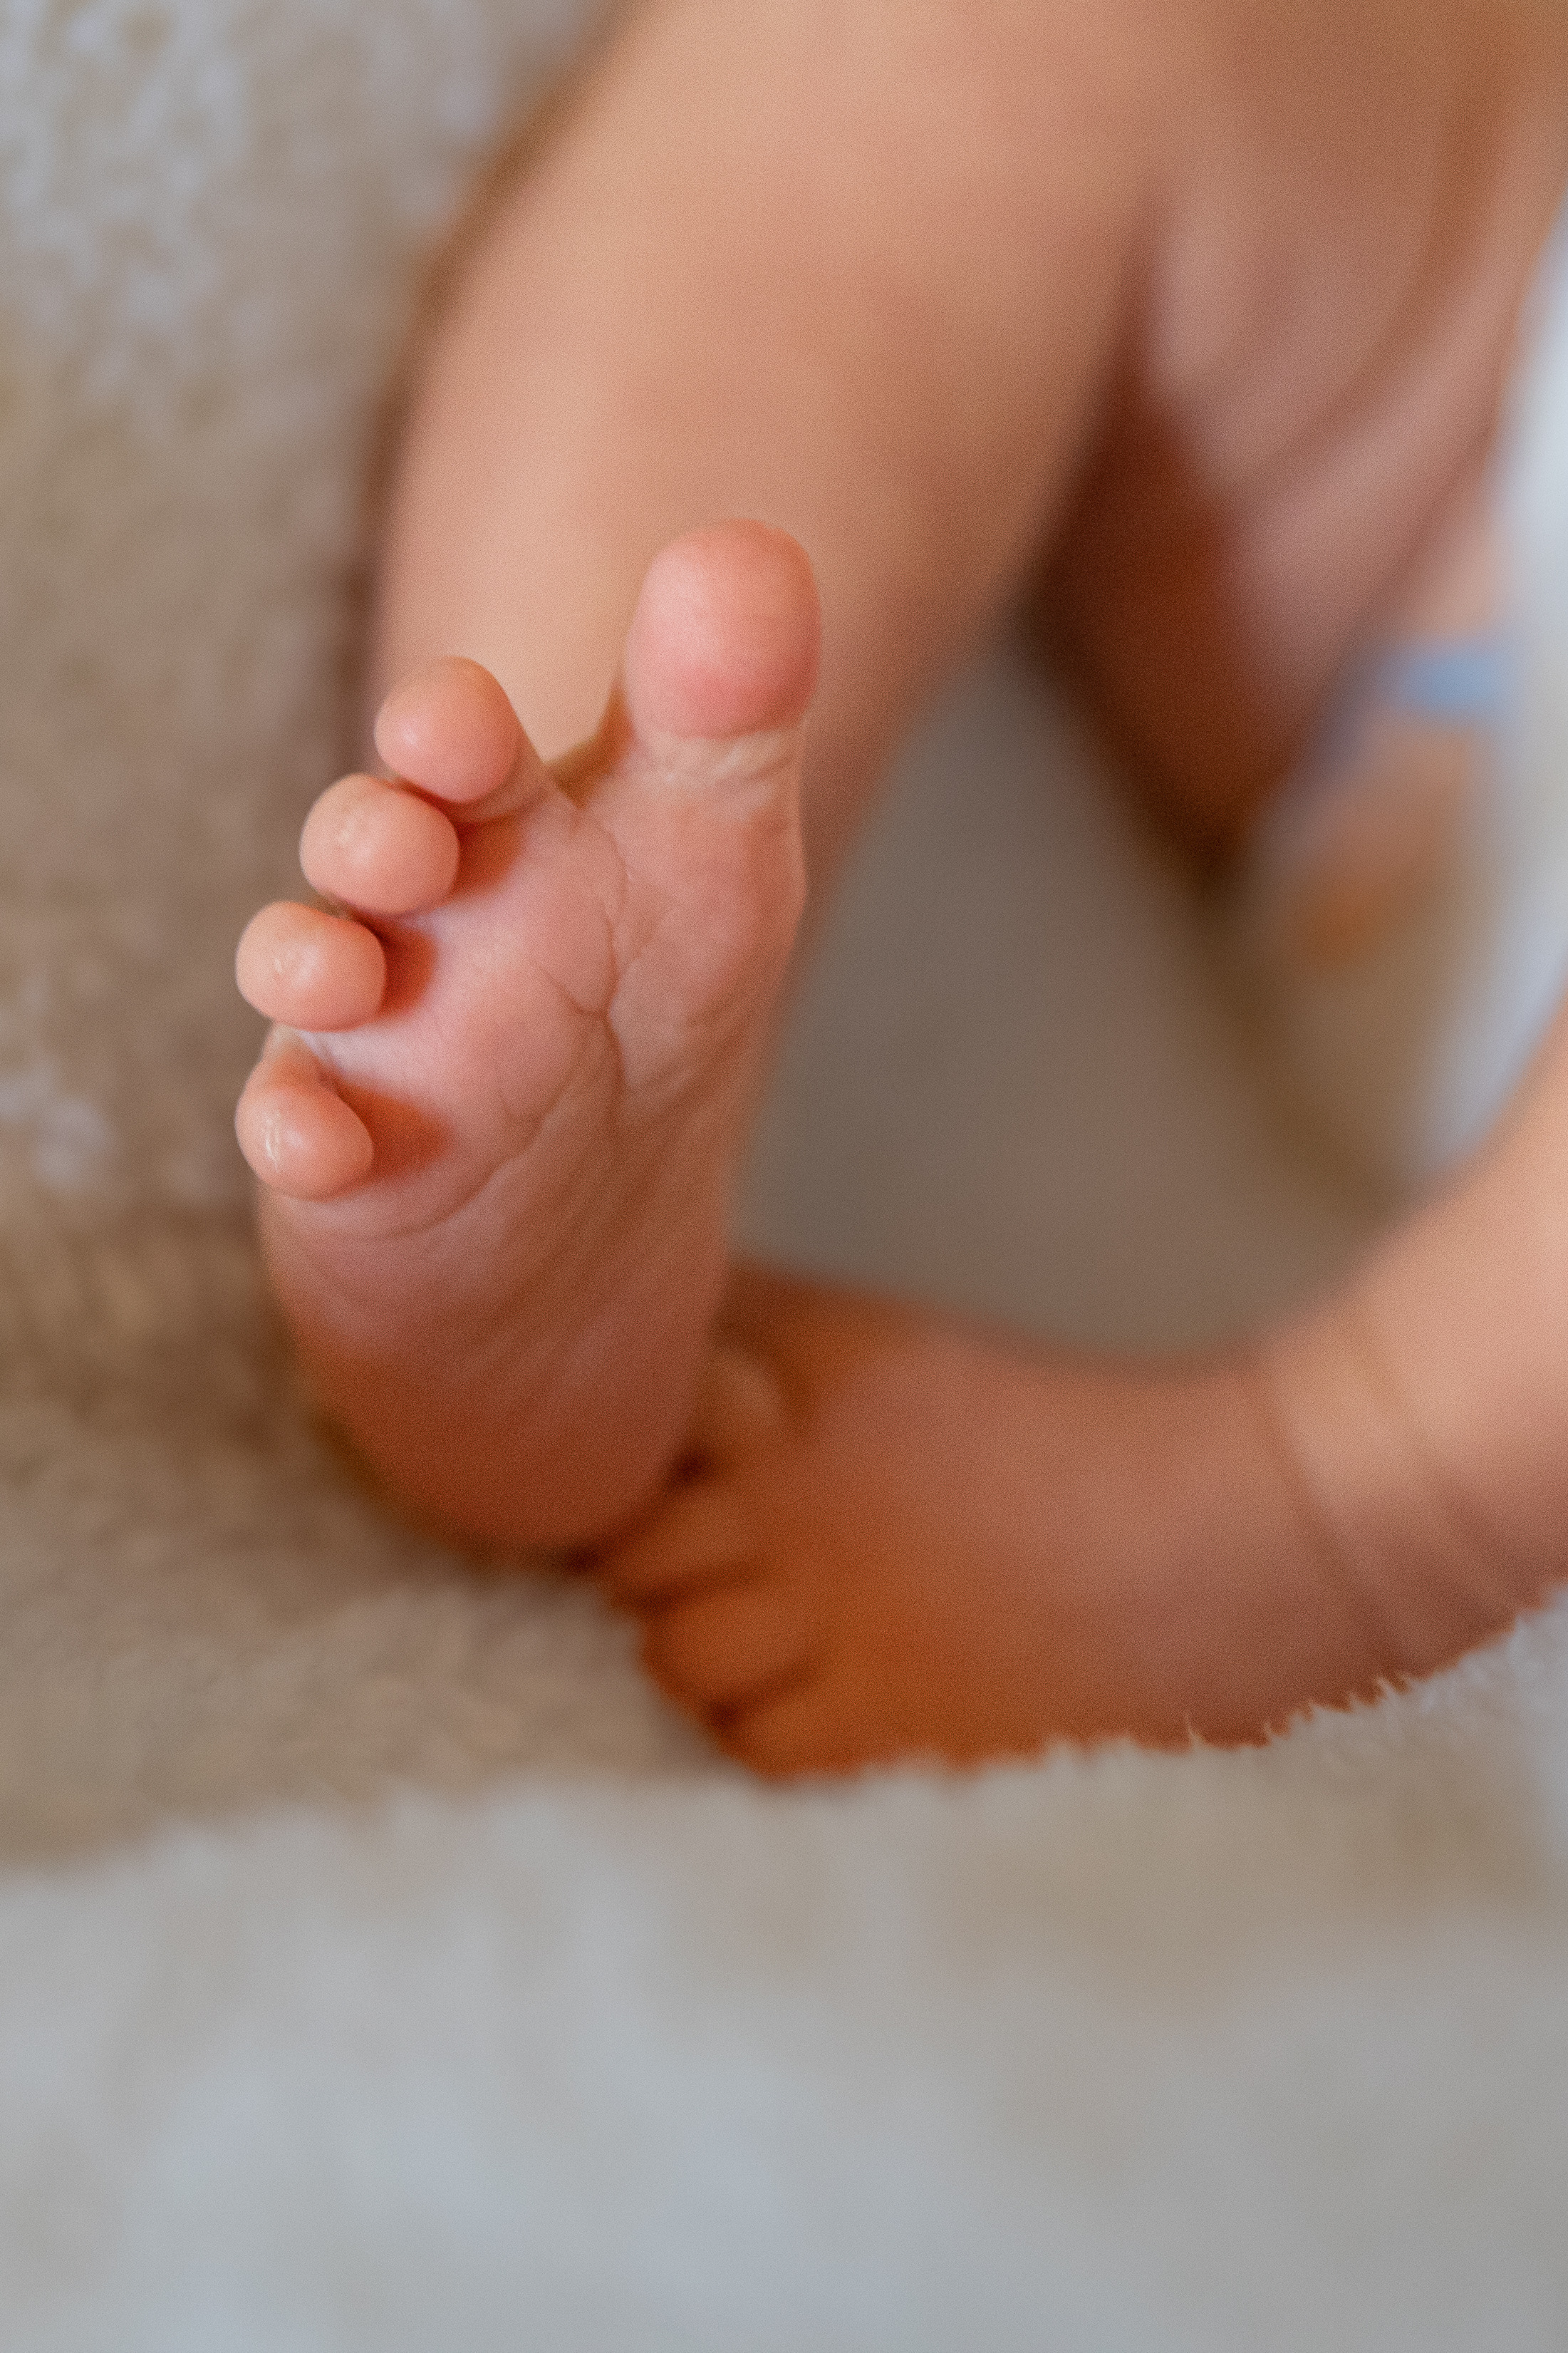 Picture of a baby's feet.